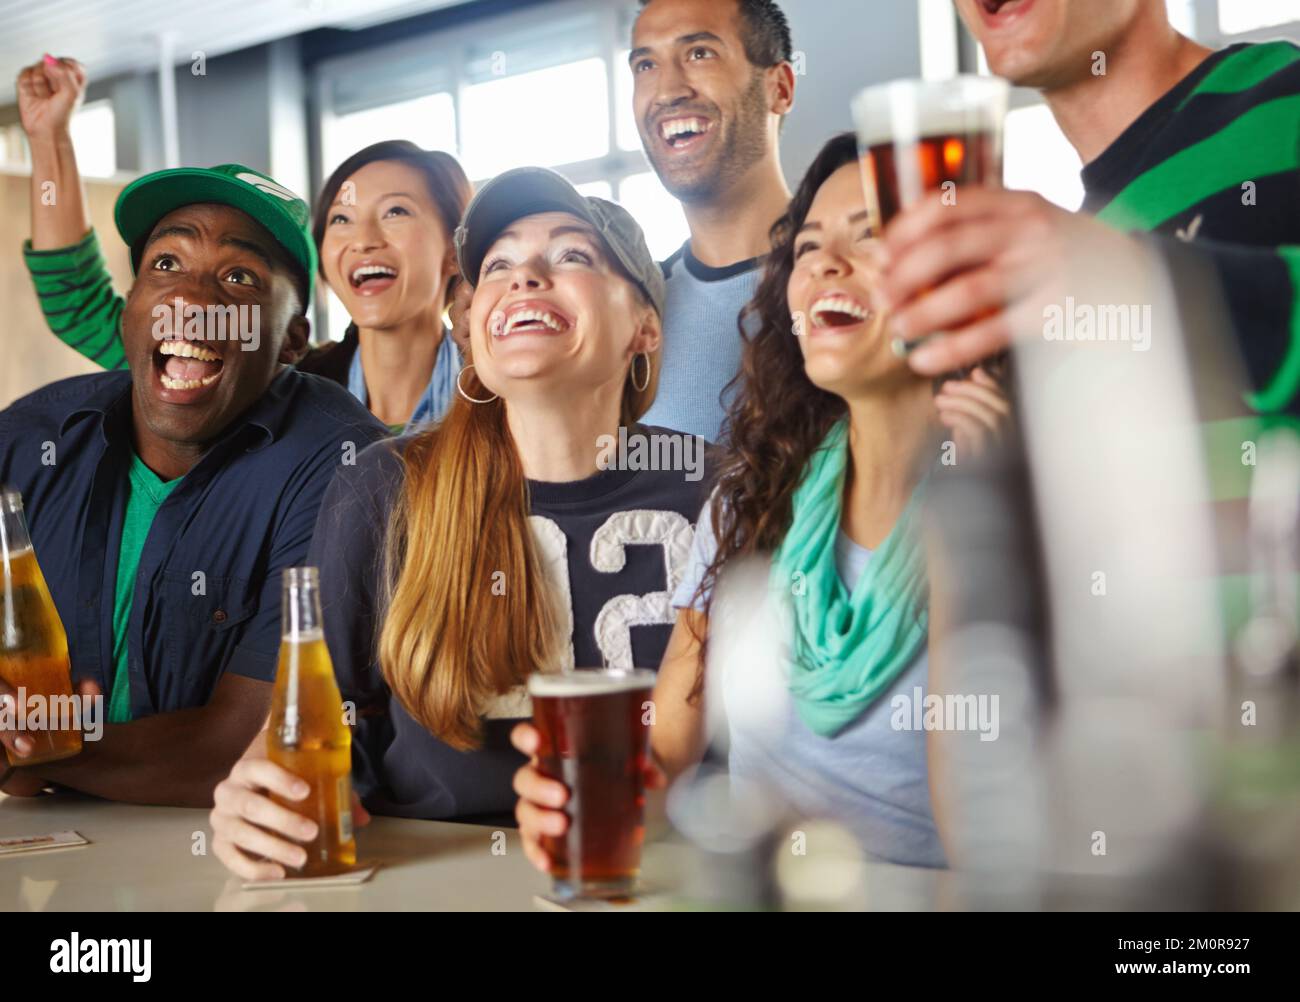 Come on. A group of friends cheering on their favourite sports team at the bar. Stock Photo